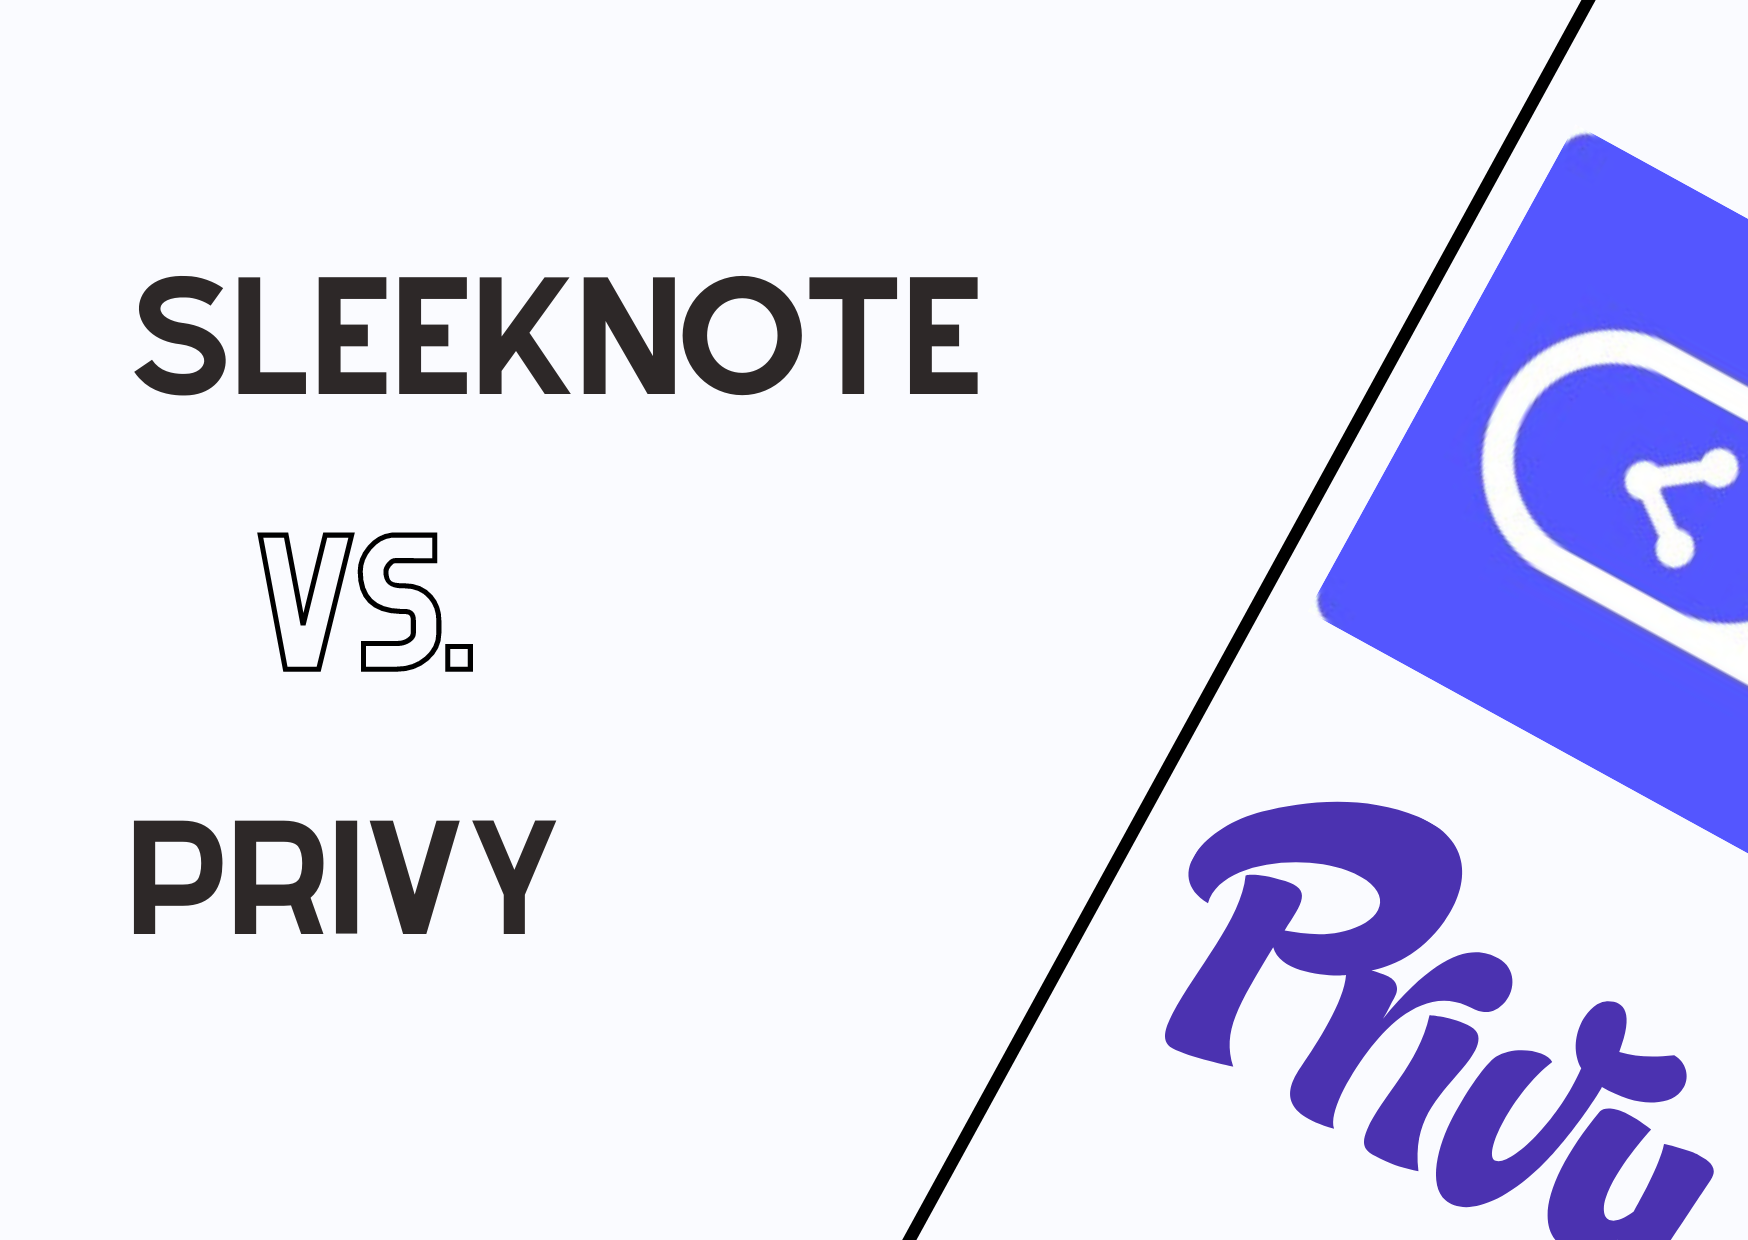 the banner of Sleeknote and Privy for their comparison in terms of features, similarities, and differences